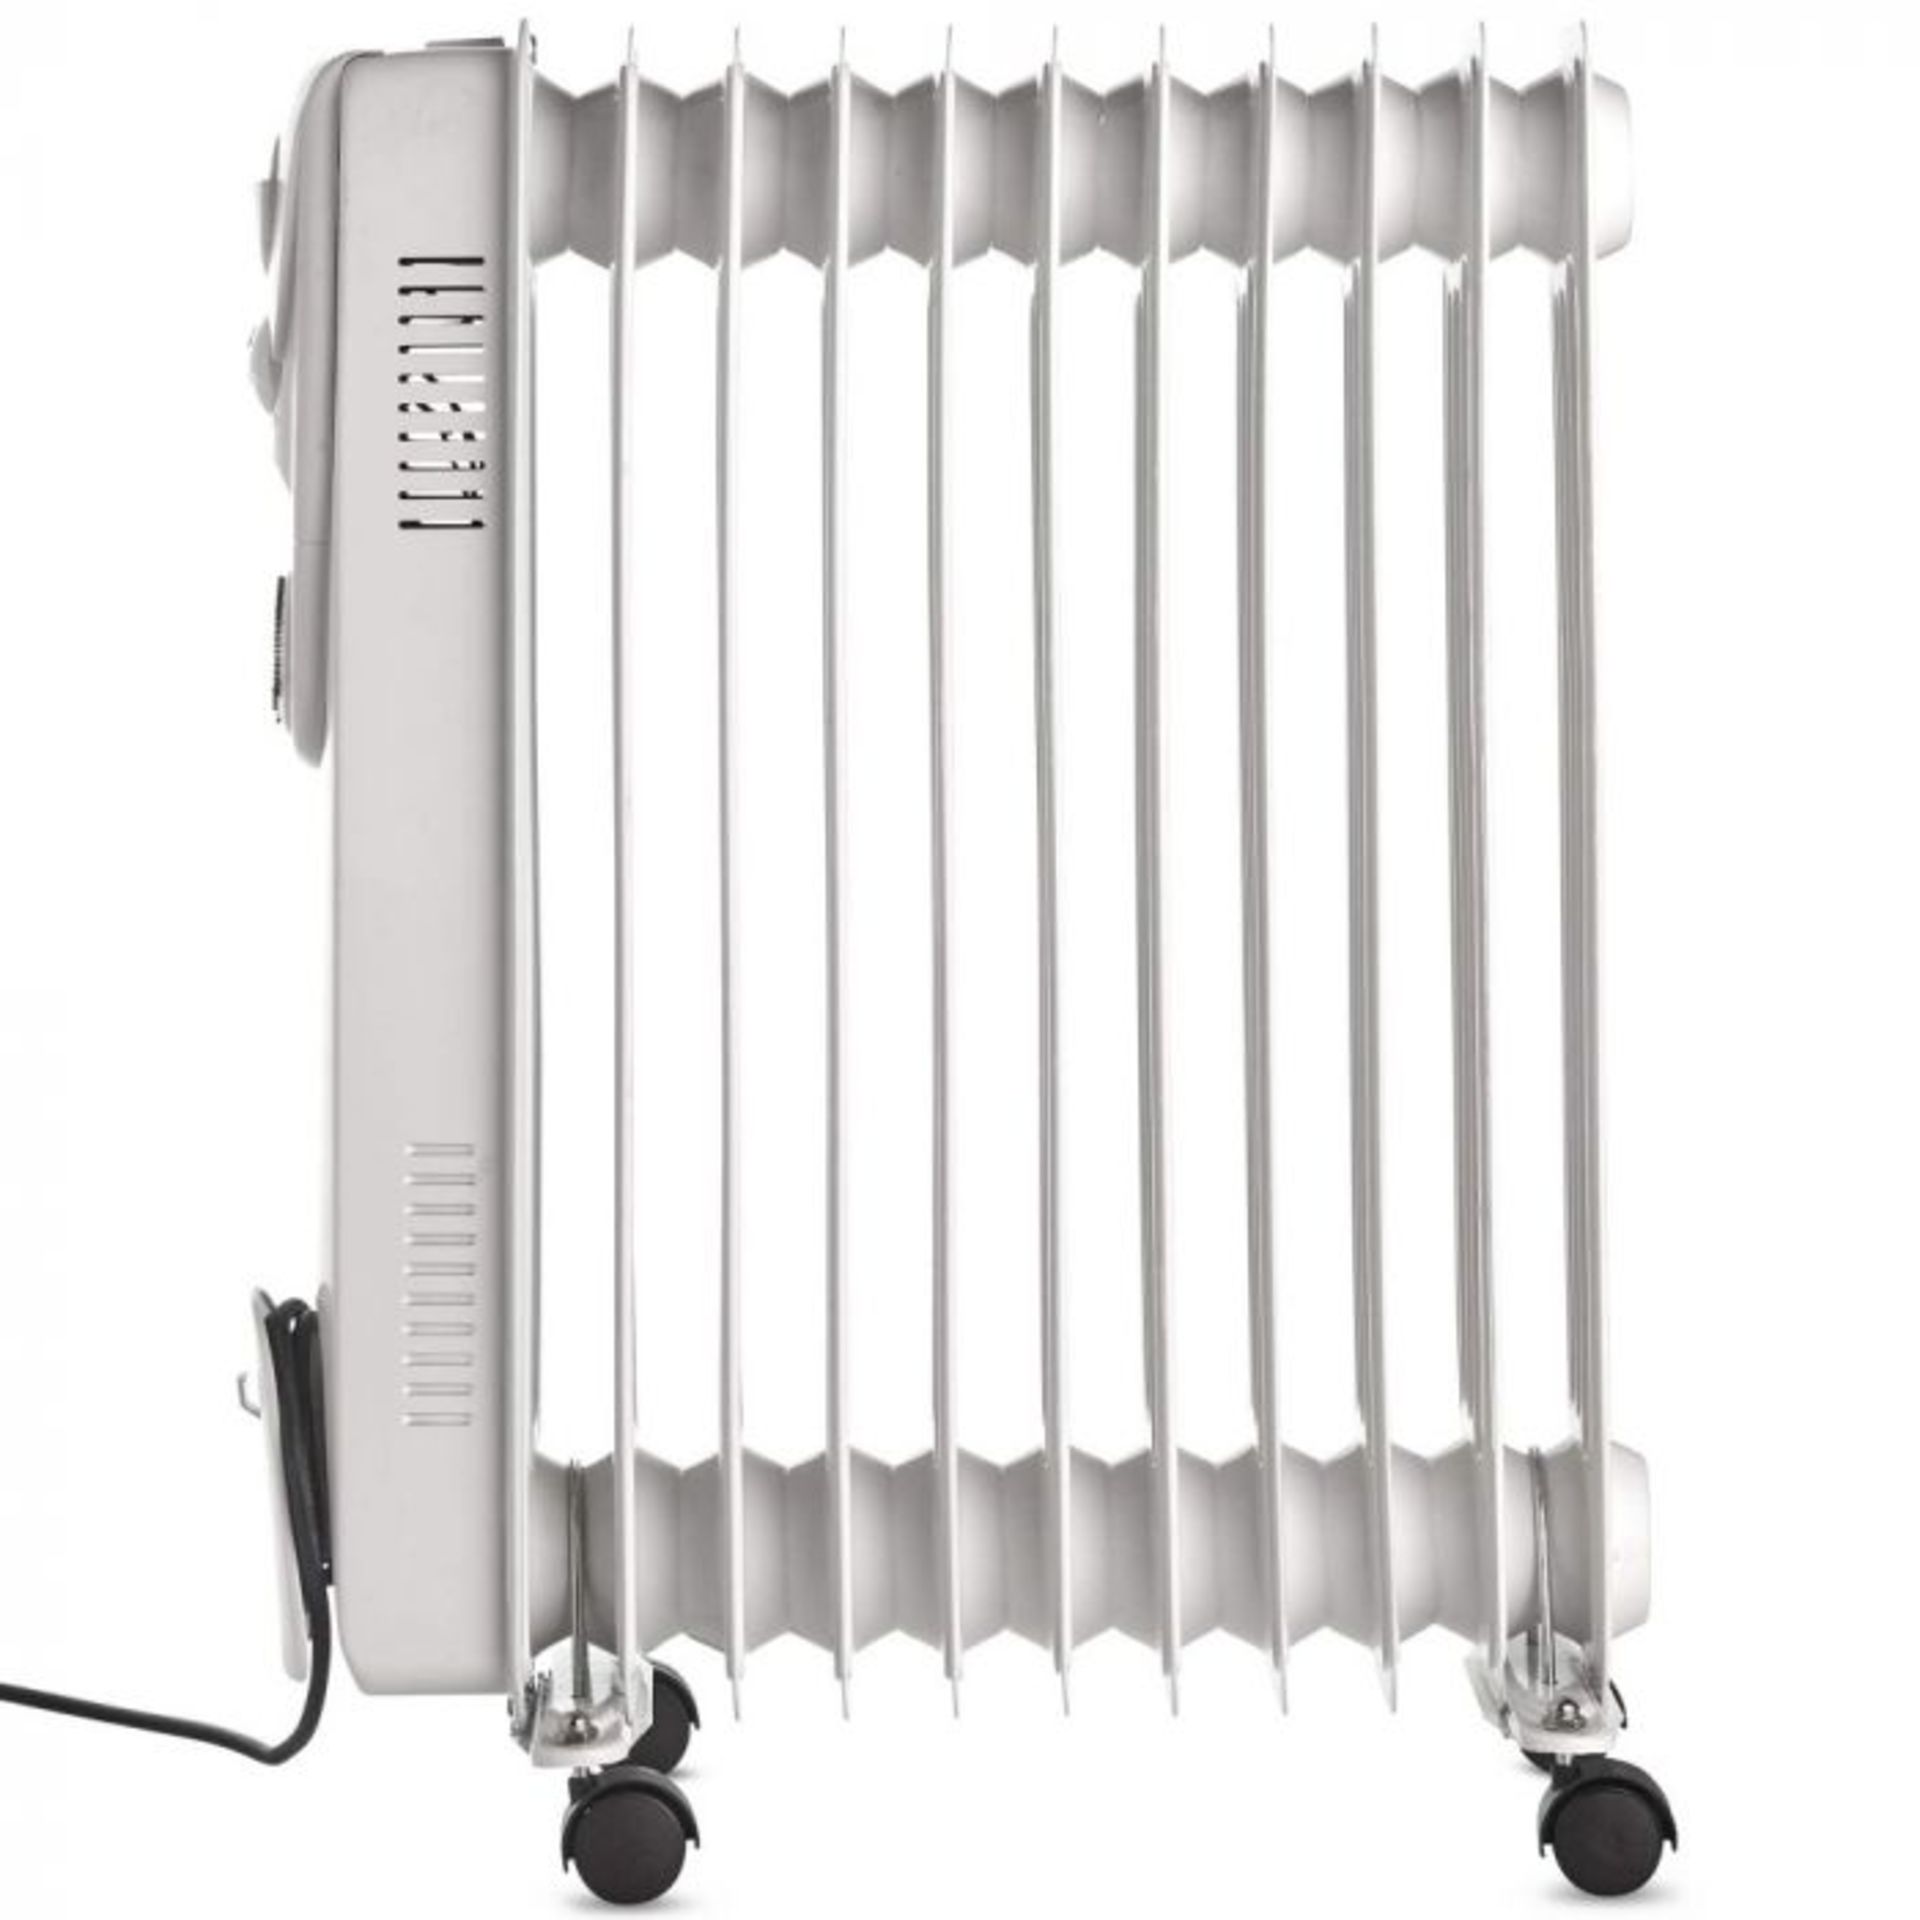 (V314) 11 Fin 2500W Oil Filled Radiator - White Suitable for areas up to 28 square metres 3 p... - Image 4 of 4